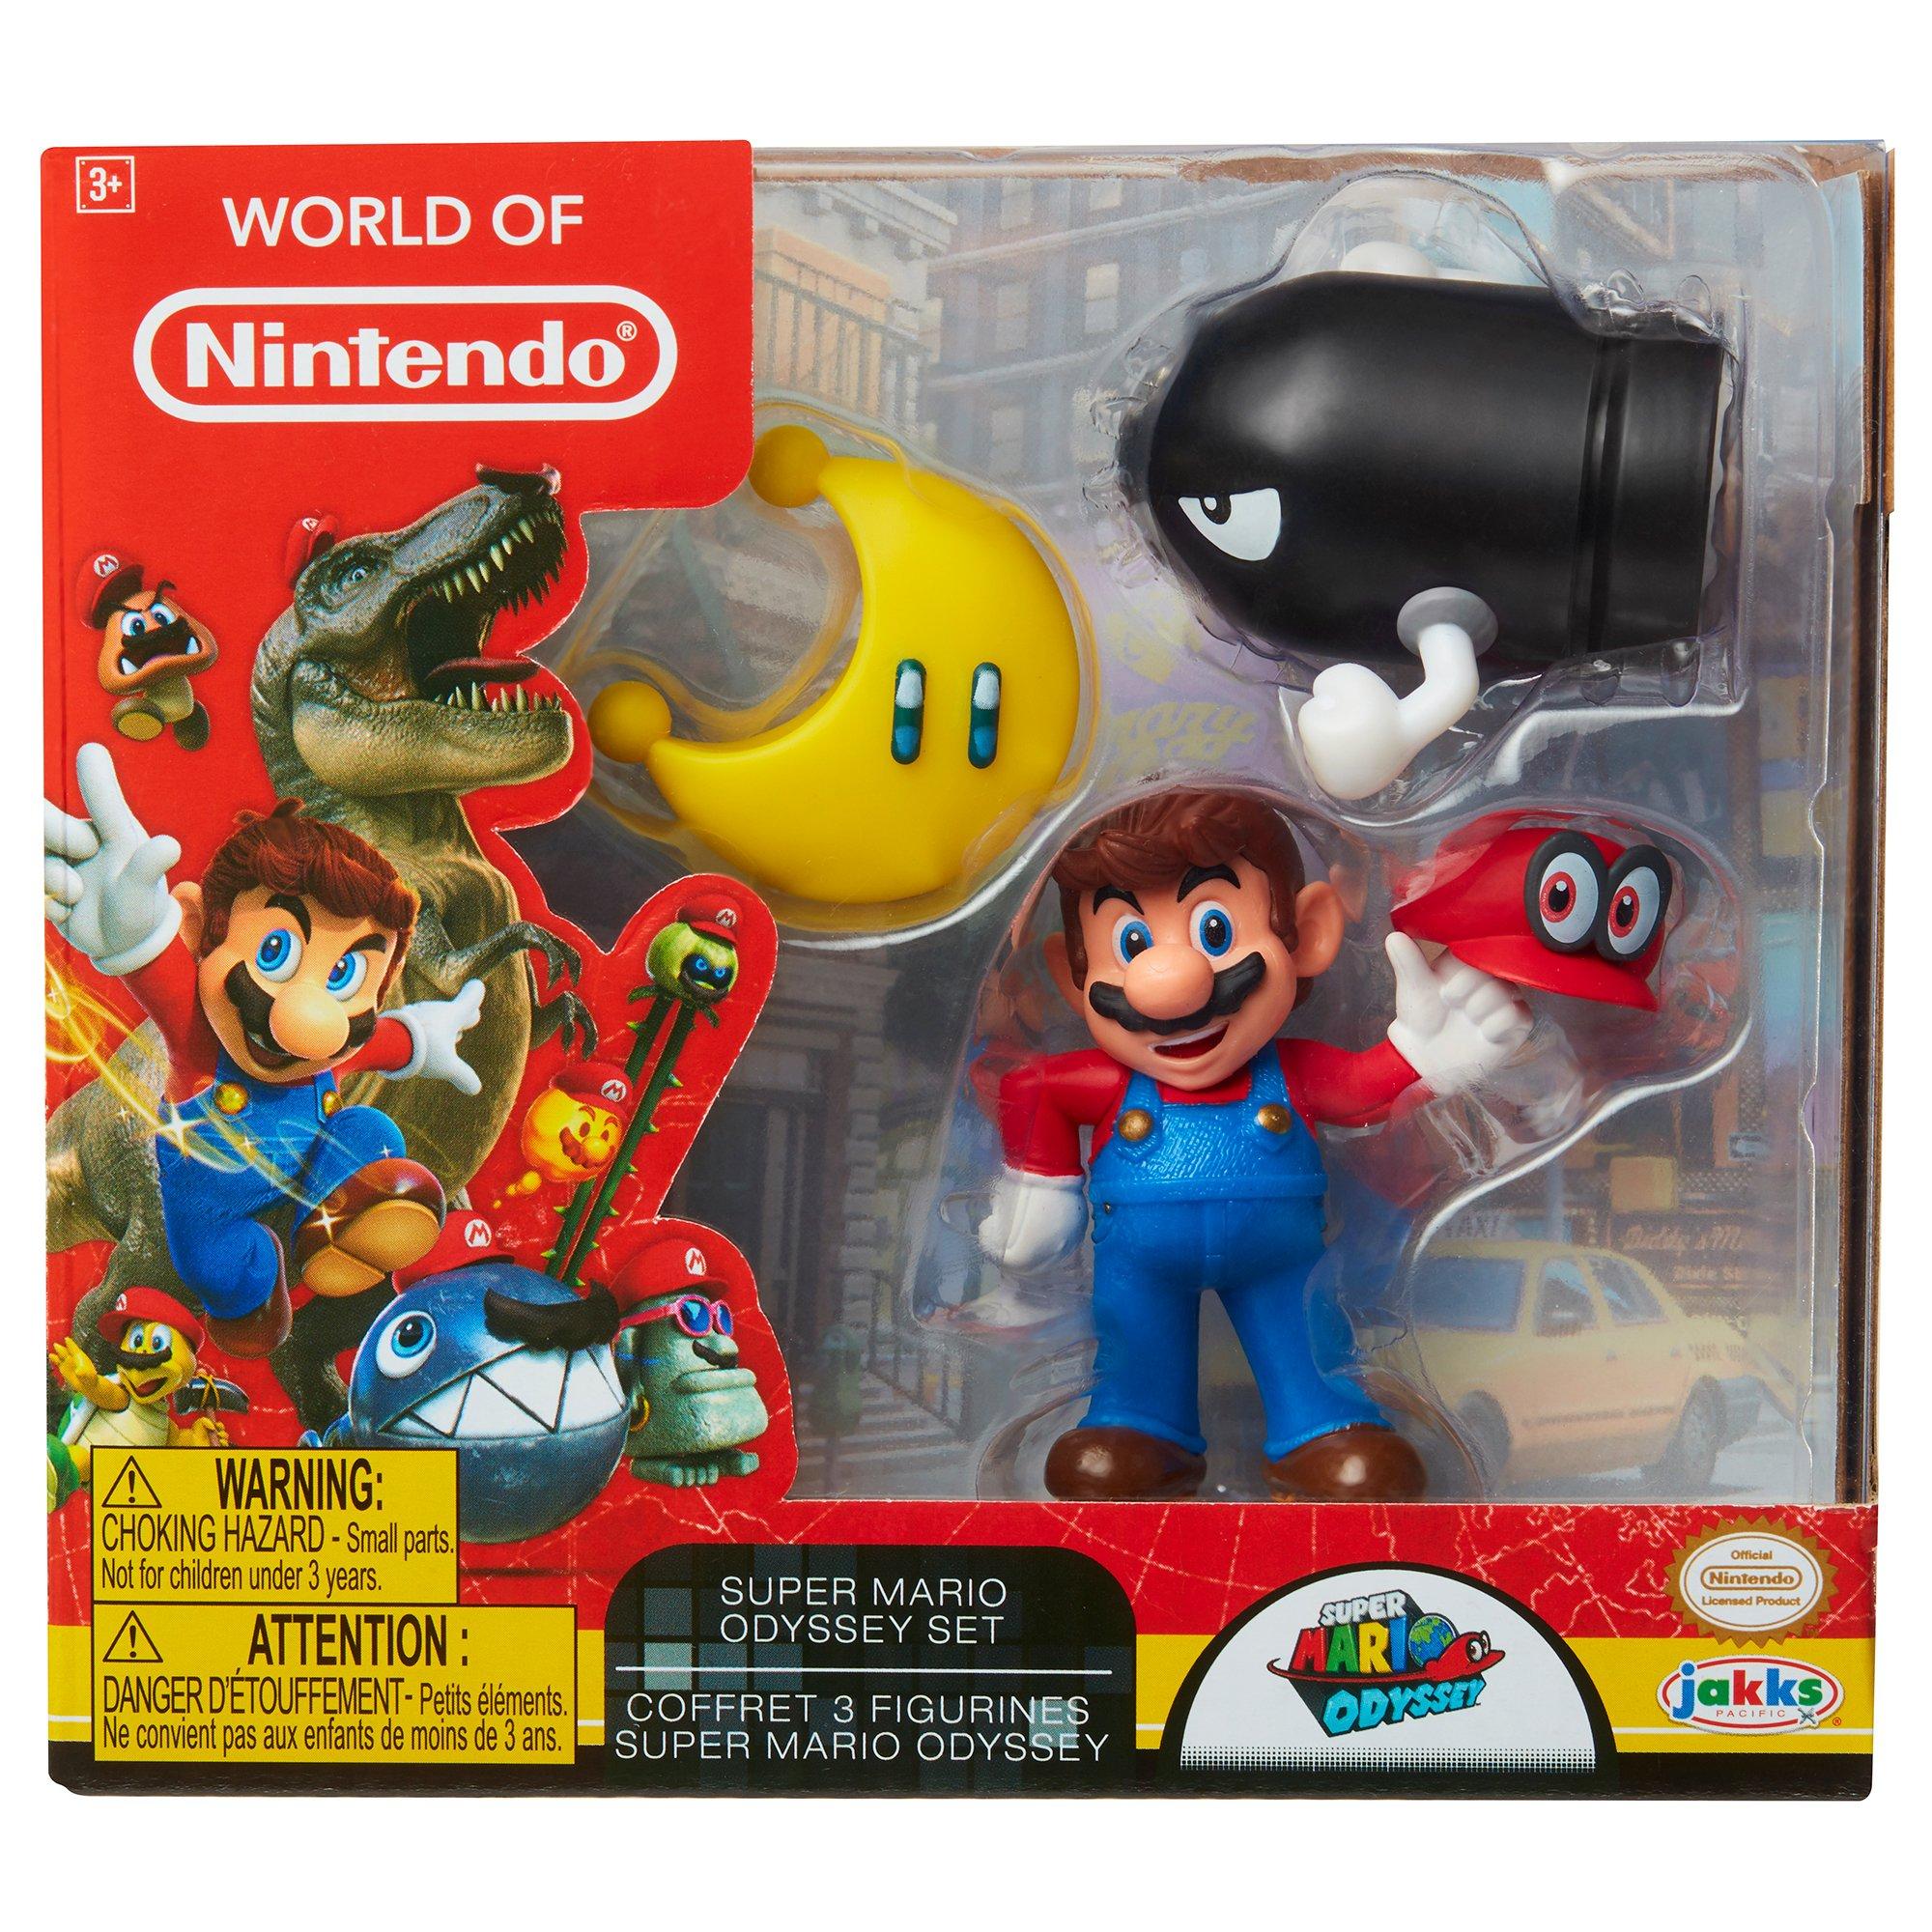 World of Nintendo Mario Odyssey Action Figure 3 Pack Only at GameStop